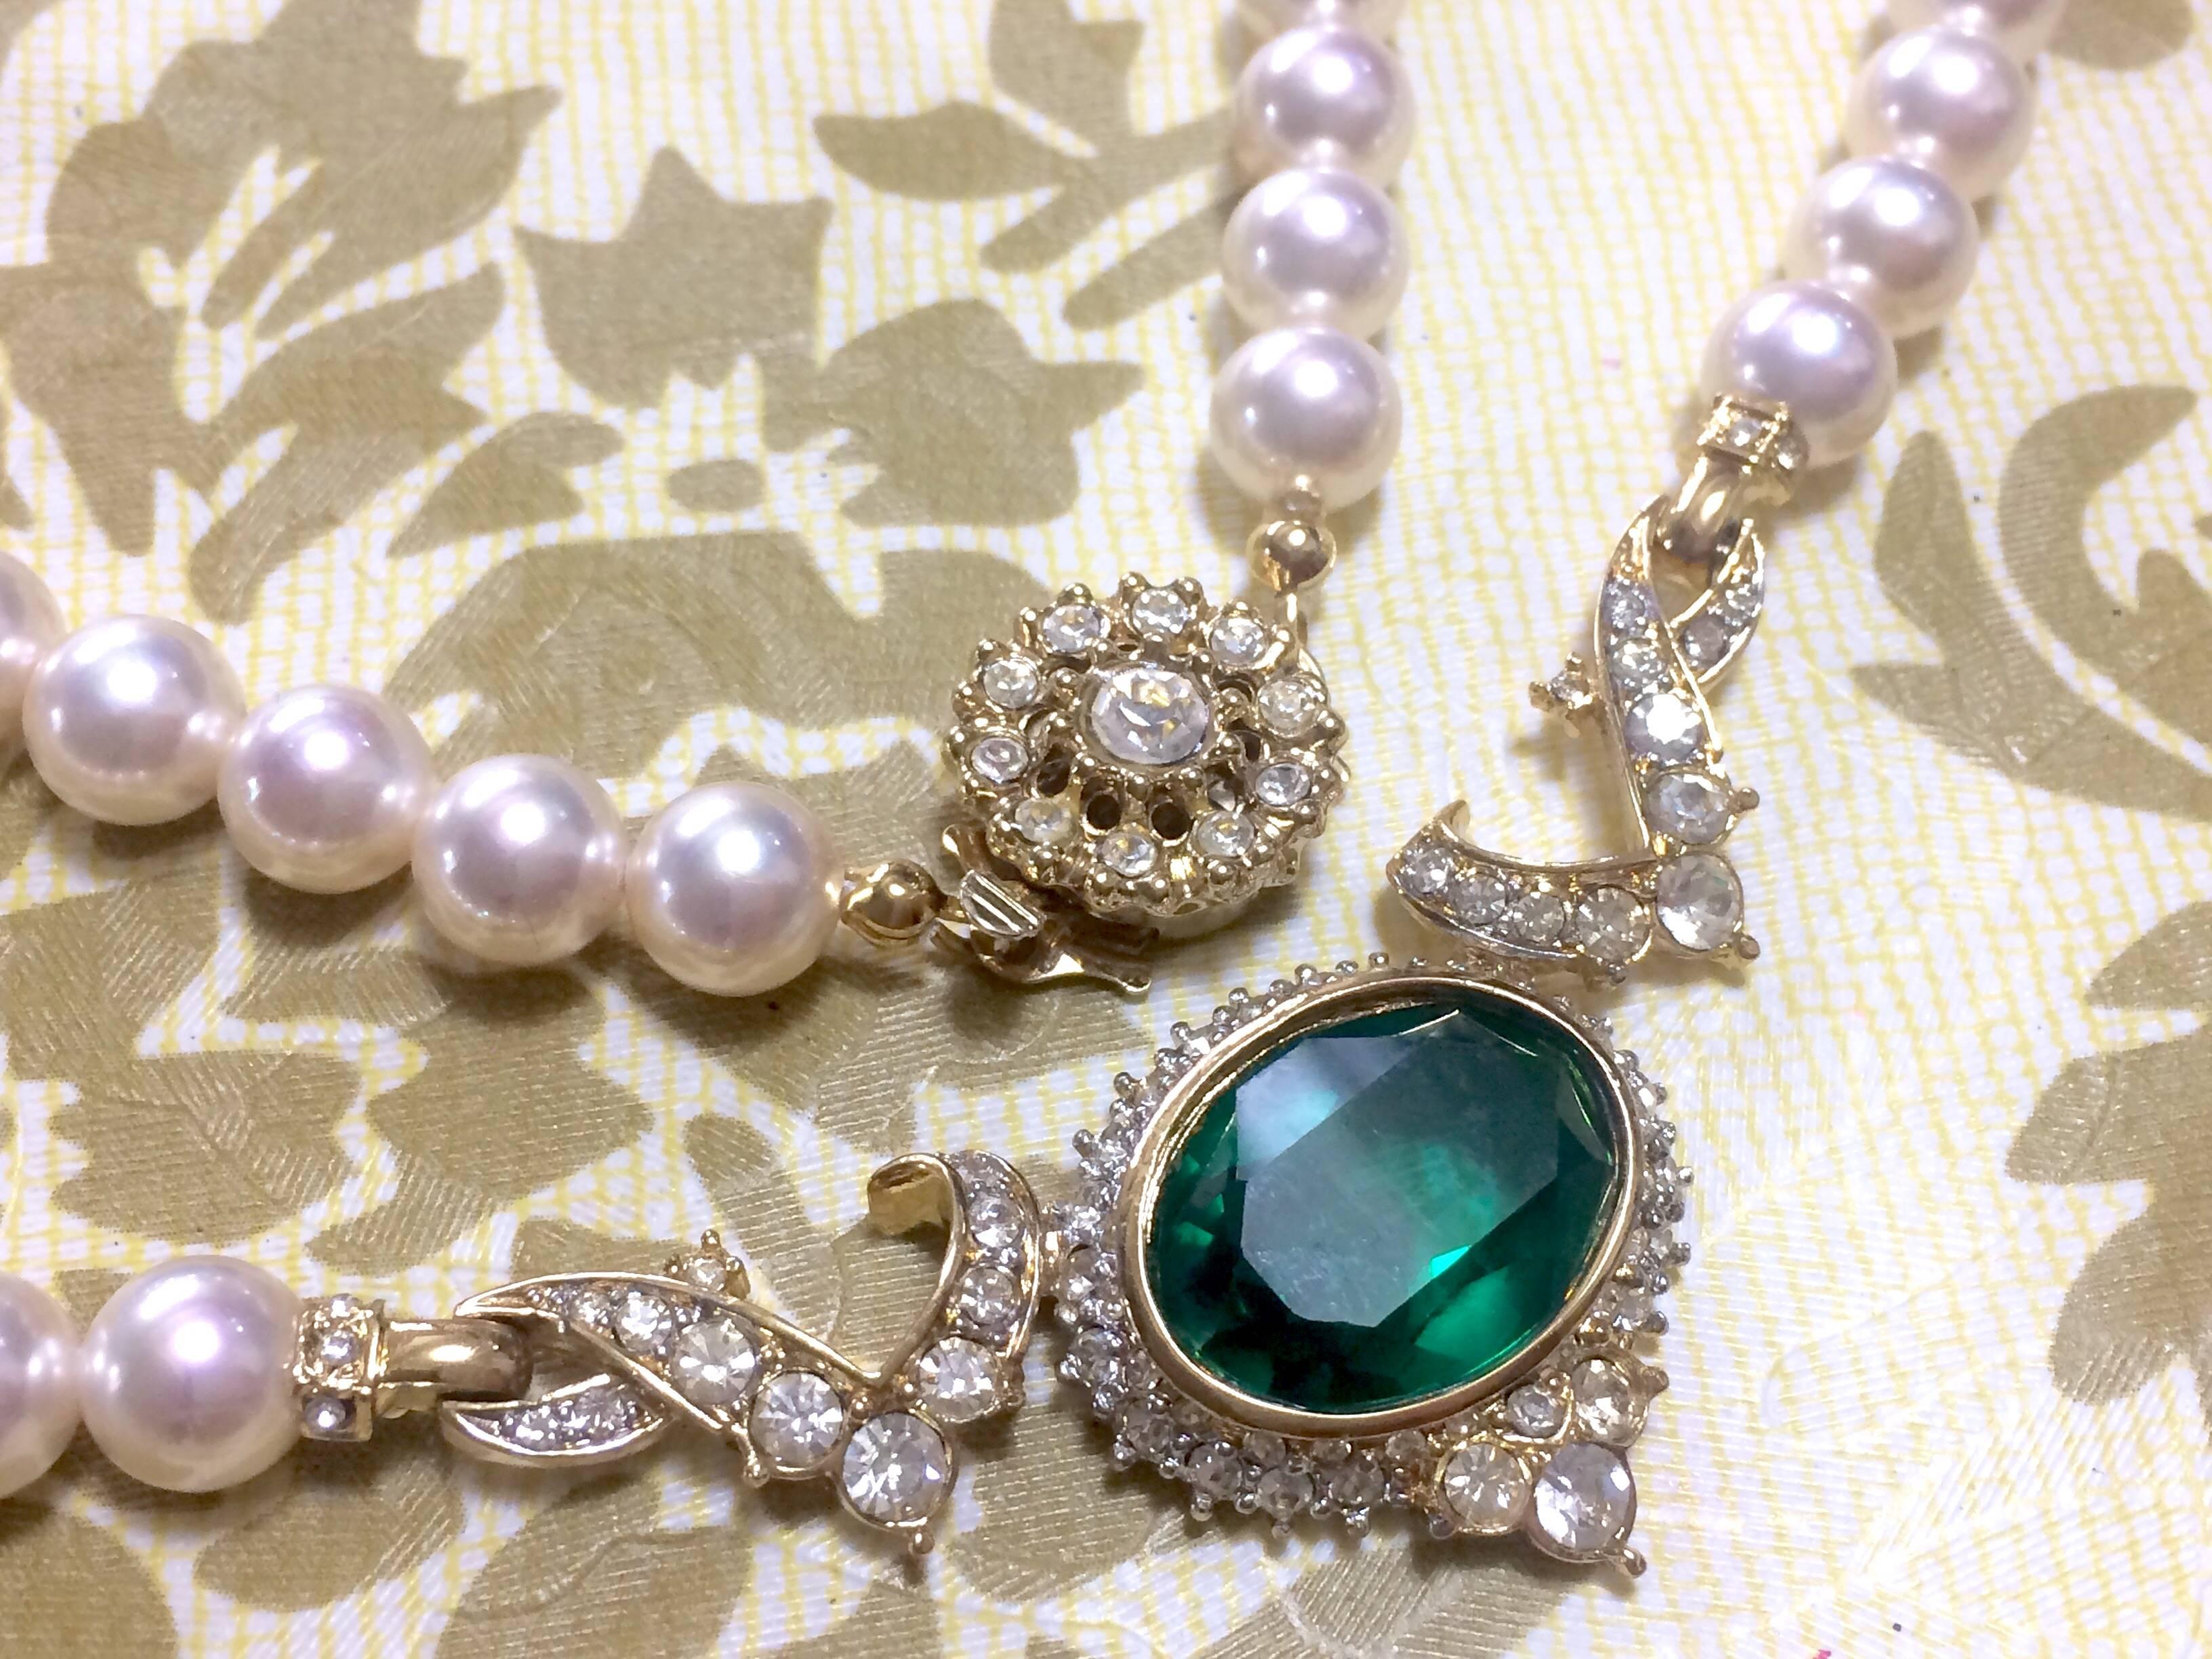 Women's MINT. Vintage Nina Ricci faux pearl necklace with green Swarovski pendant top. For Sale